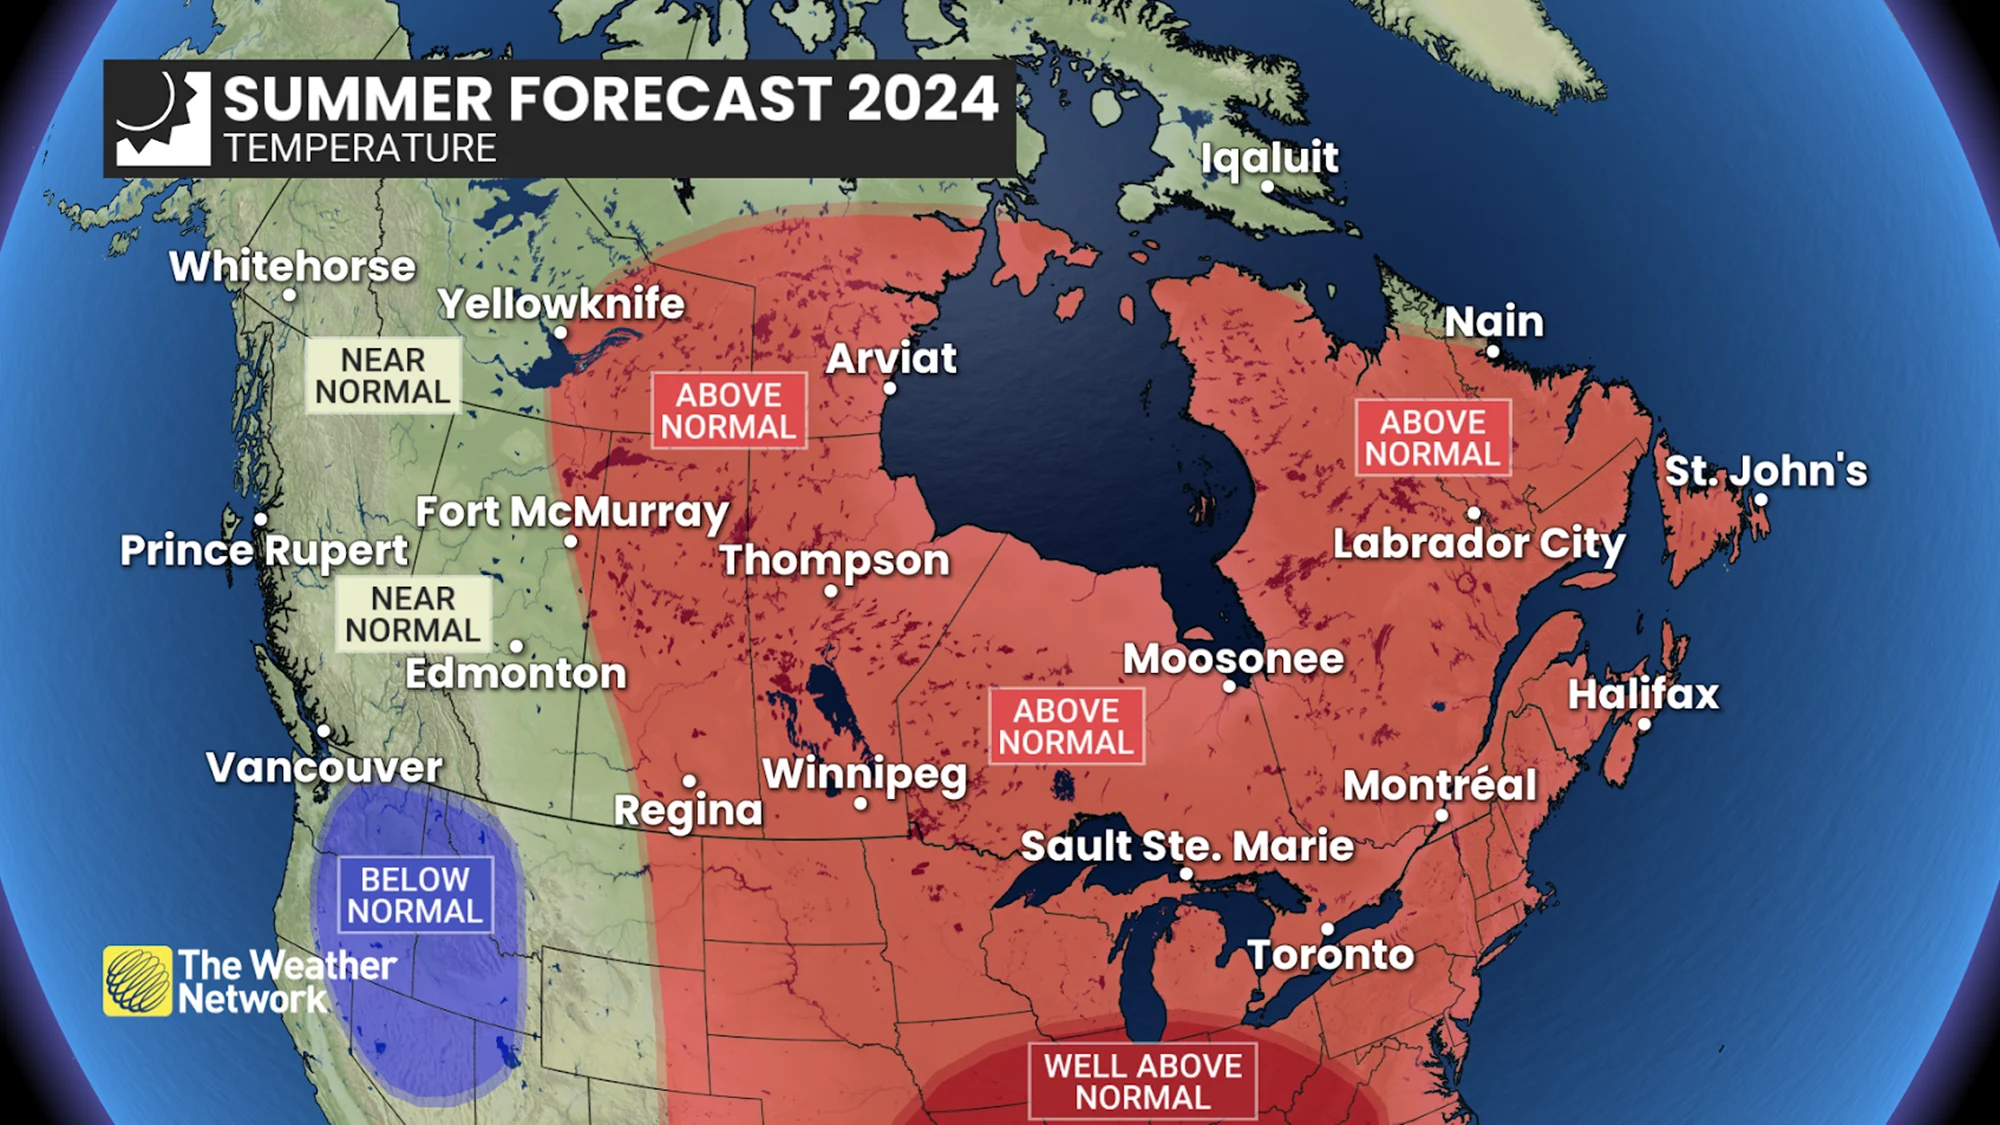 THE WEATHER NETWORK: Canada's 2024 Summer Forecast - Temperature Outlook 2